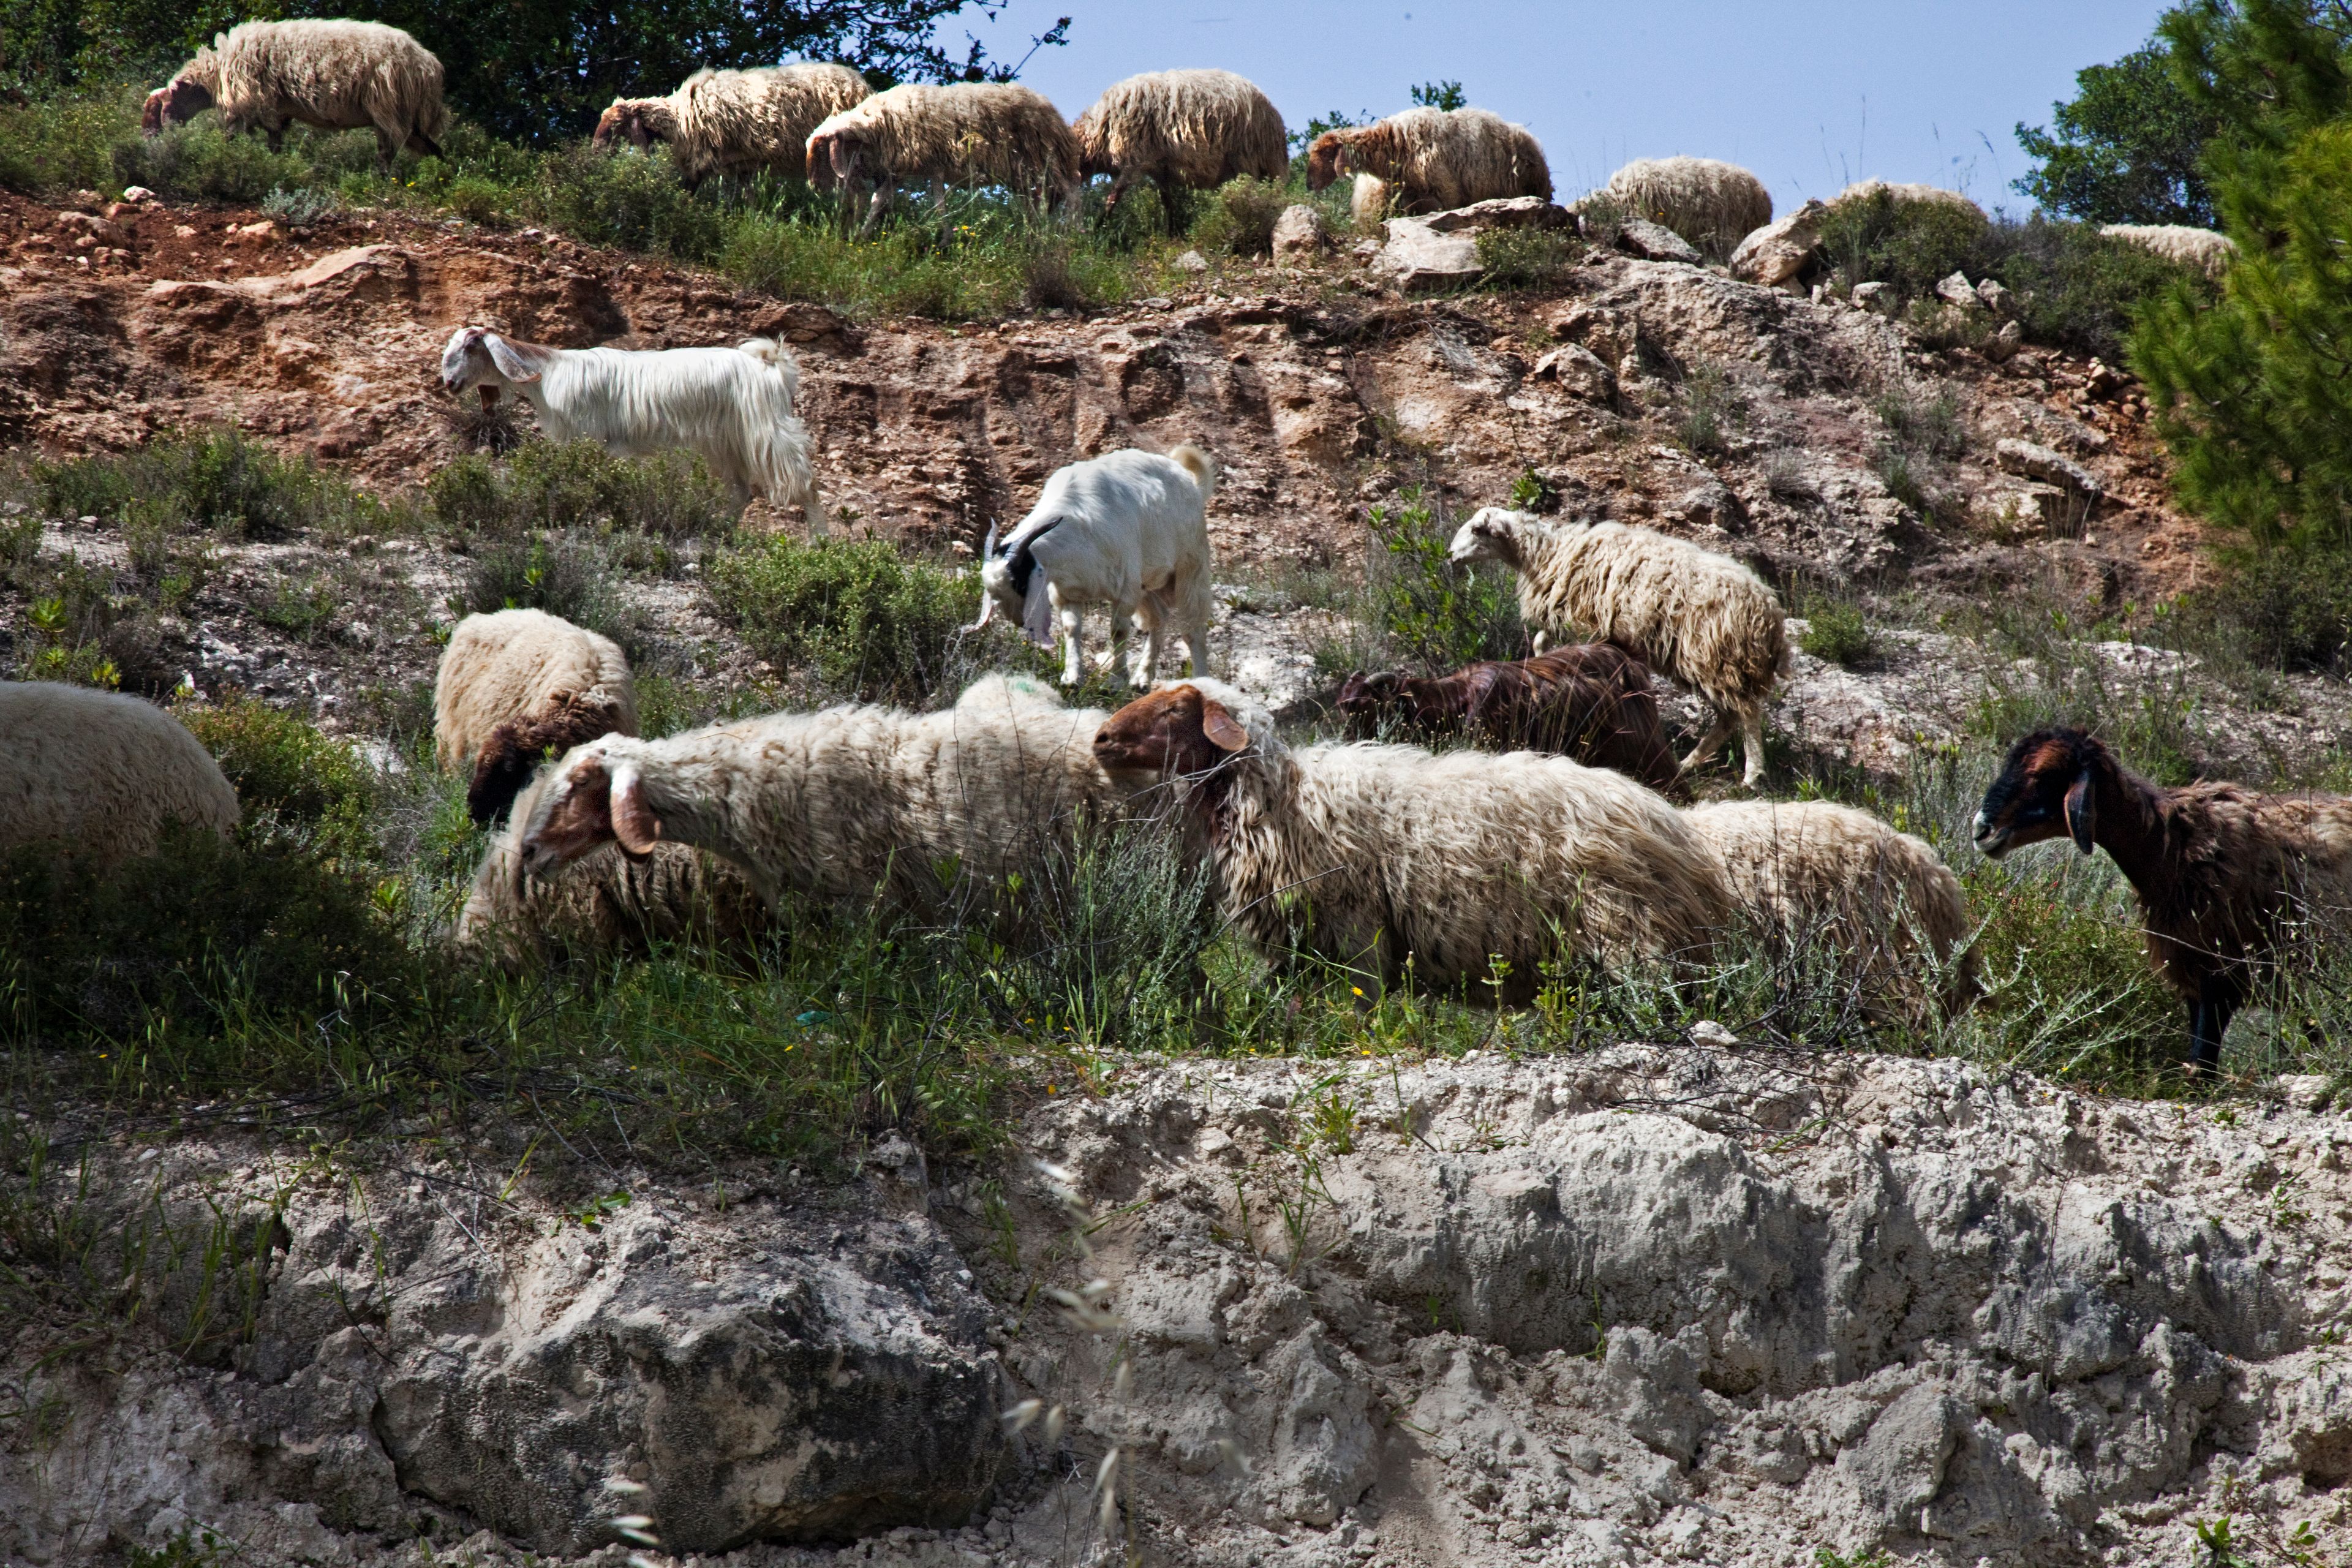 A photograph of sheep and goats.